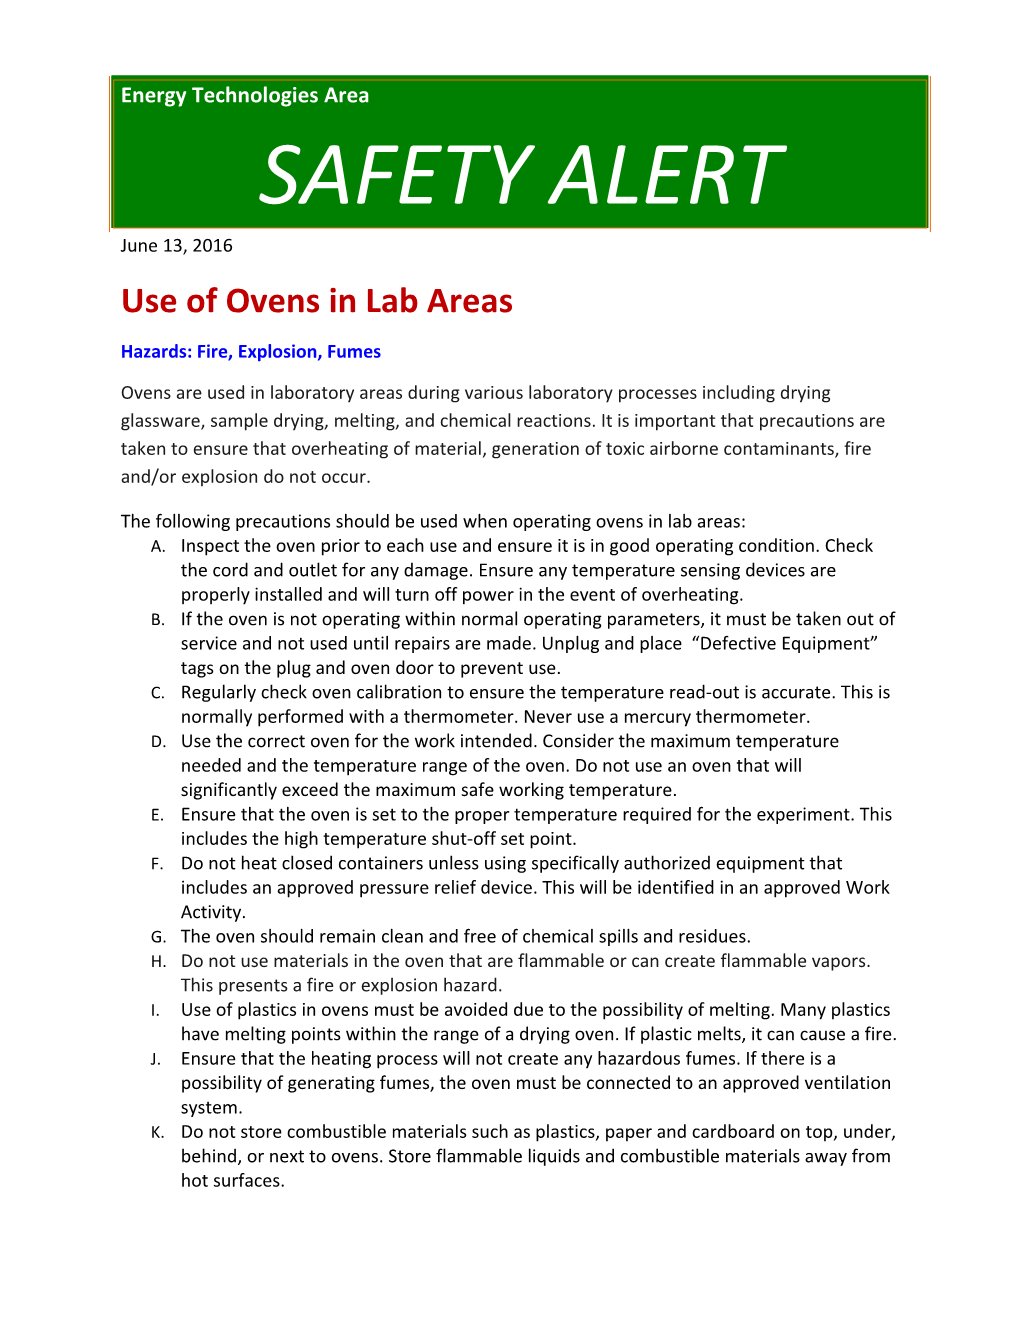 Use of Ovens in Lab Areas